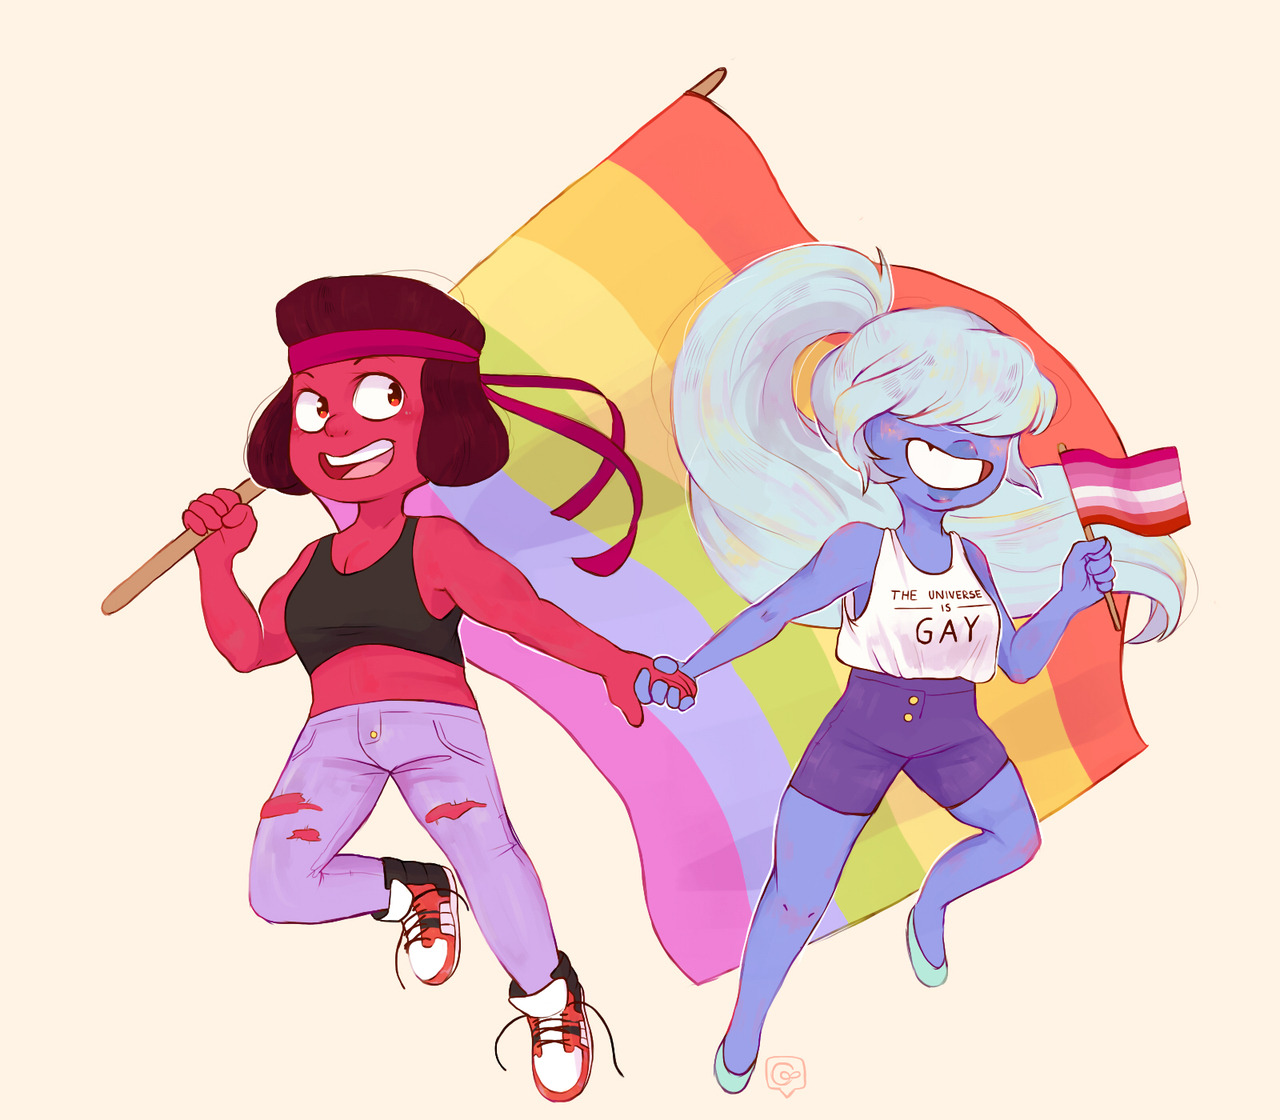 My contribution for PRIDE MONTH!~